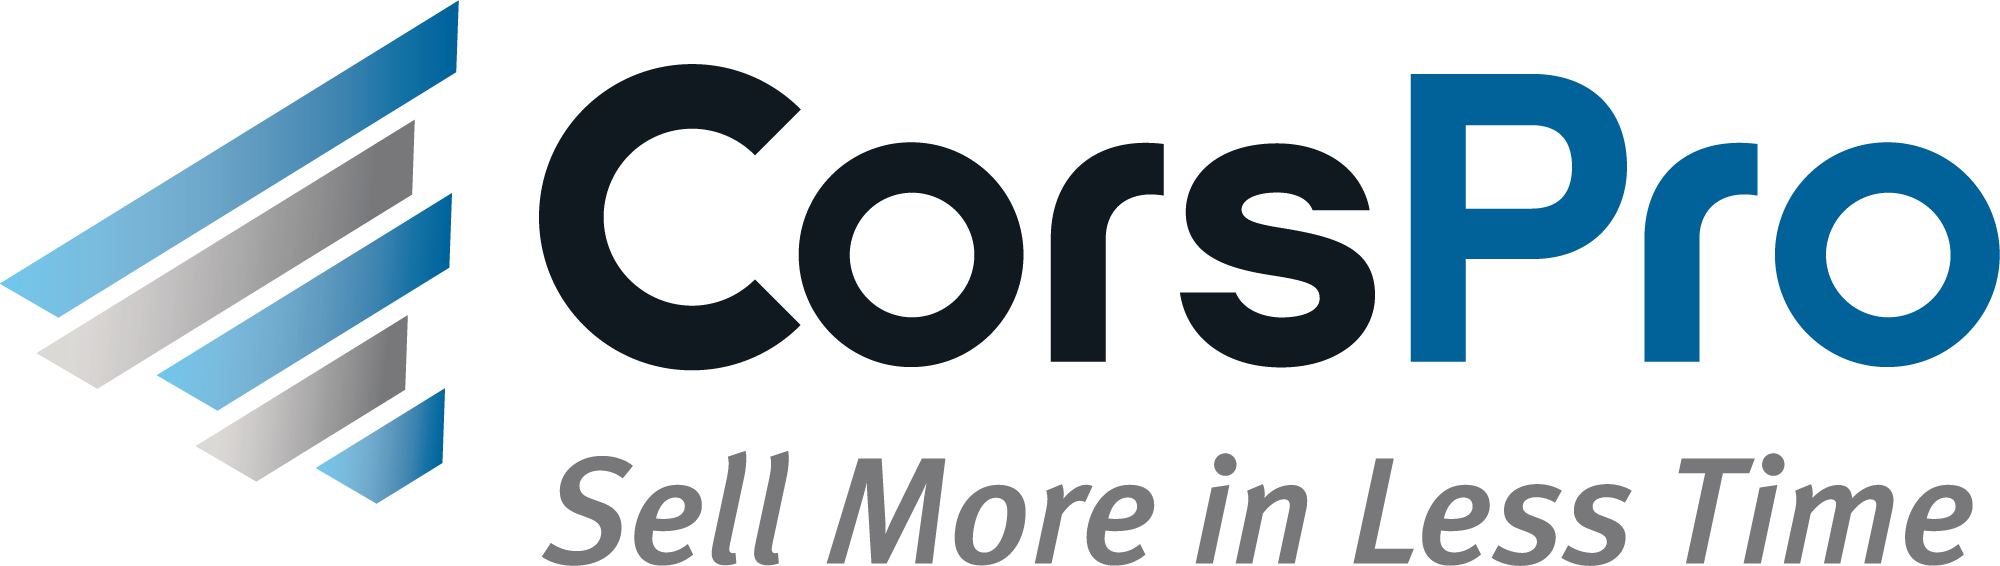 CorsPro - Sell More in Less Time